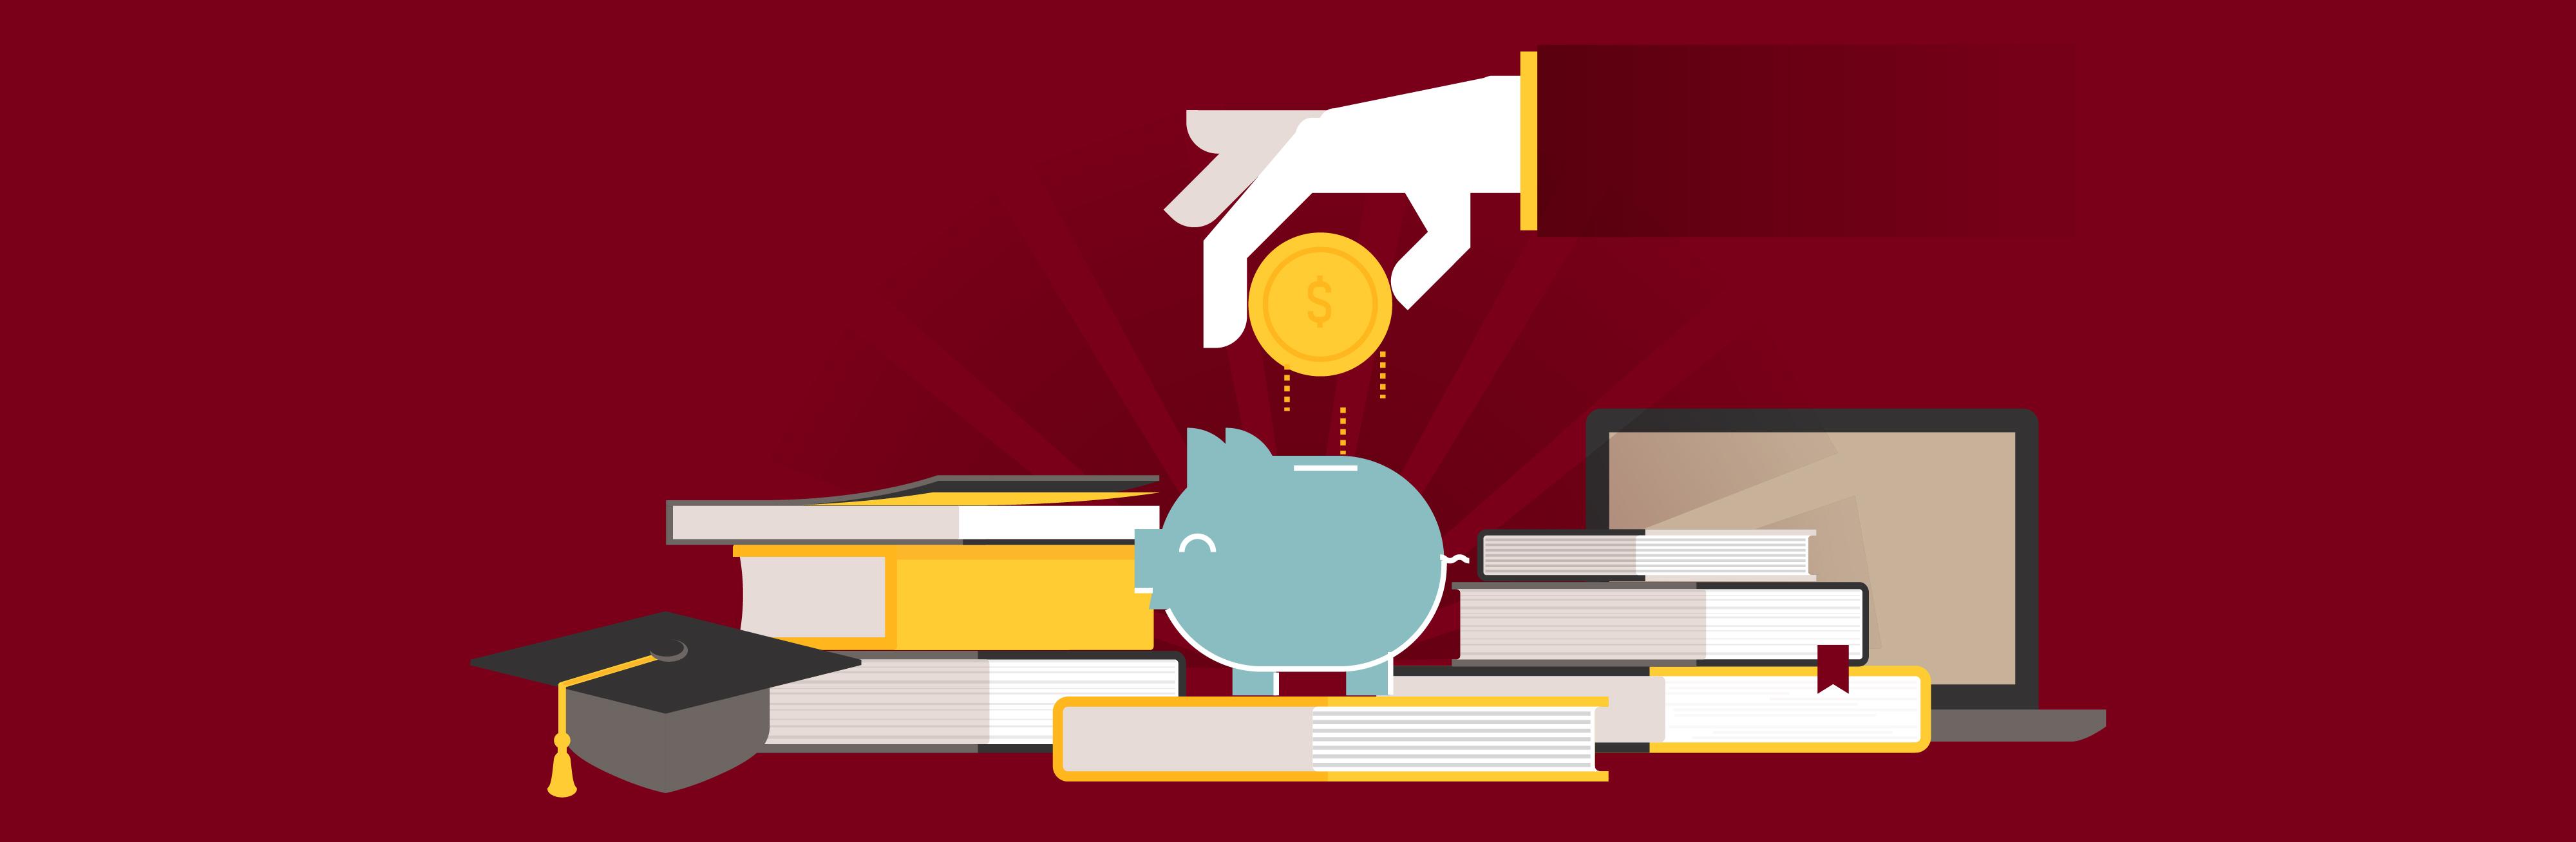 Graphic of a hand dropping a coin into a piggy bank, surrounded by books.